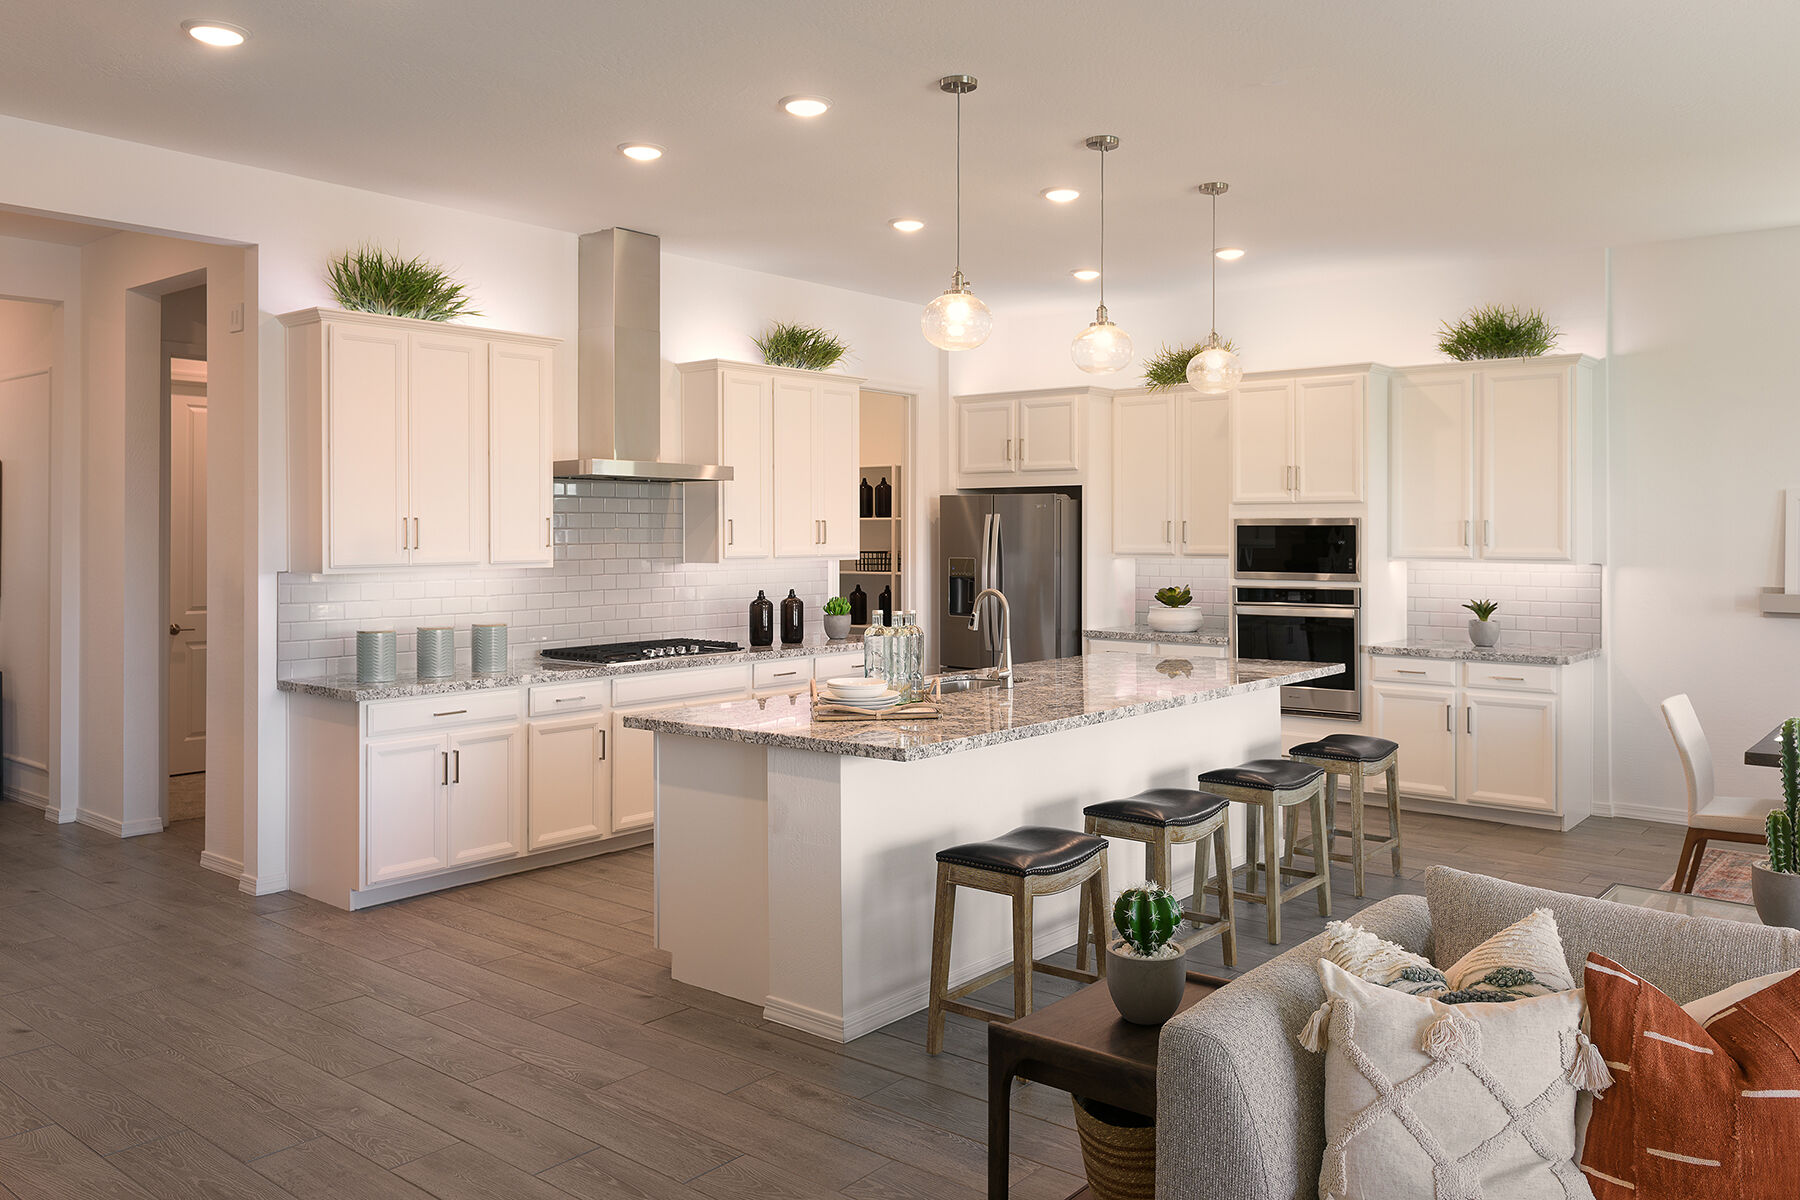 L-Shaped Kitchen with oven, pendant light, refrigerator, cooktop, wood flooring and white cabinets